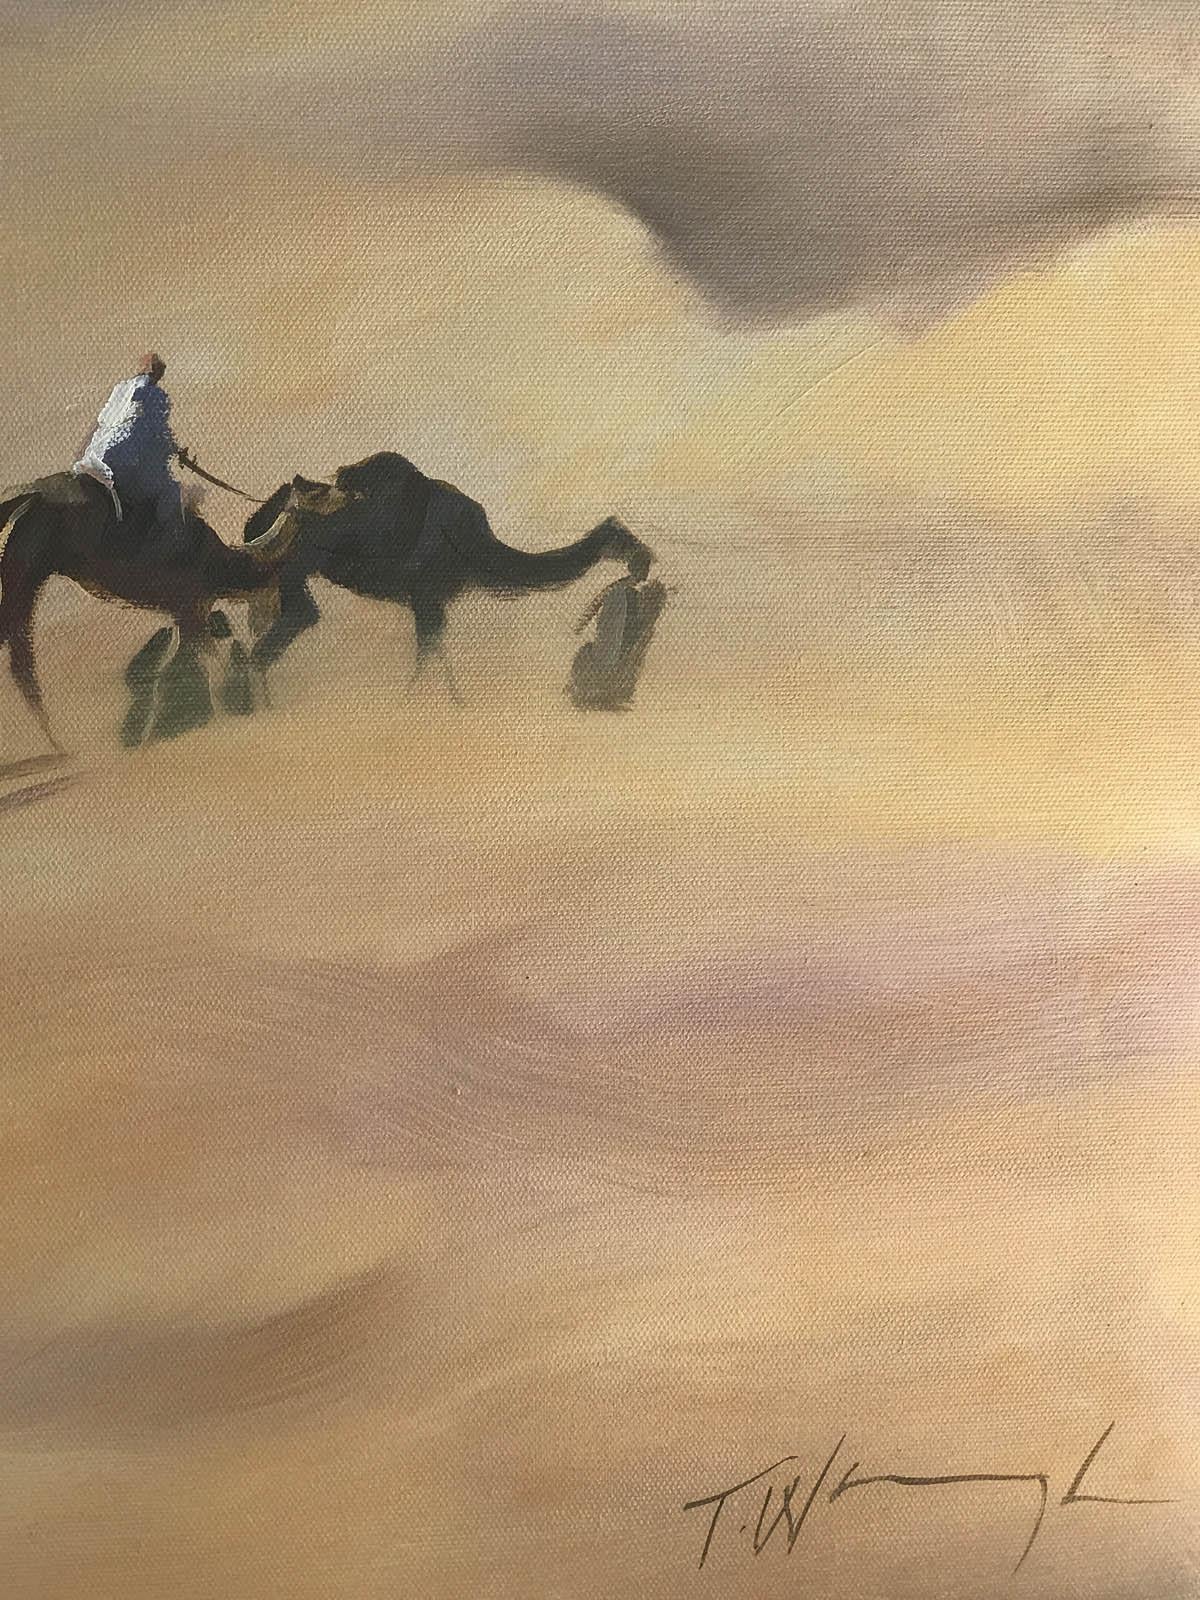 Trevor Waugh
The Rhub Al Khali
Original Unframed Oil Painting
Oil Paint on Canvas
Size: H 50.8cm (20 inches) x W 76.2 (30 inches)
Please note that in situ images are purely an indication of how a piece may look.

The Rhub Al Khali is an original